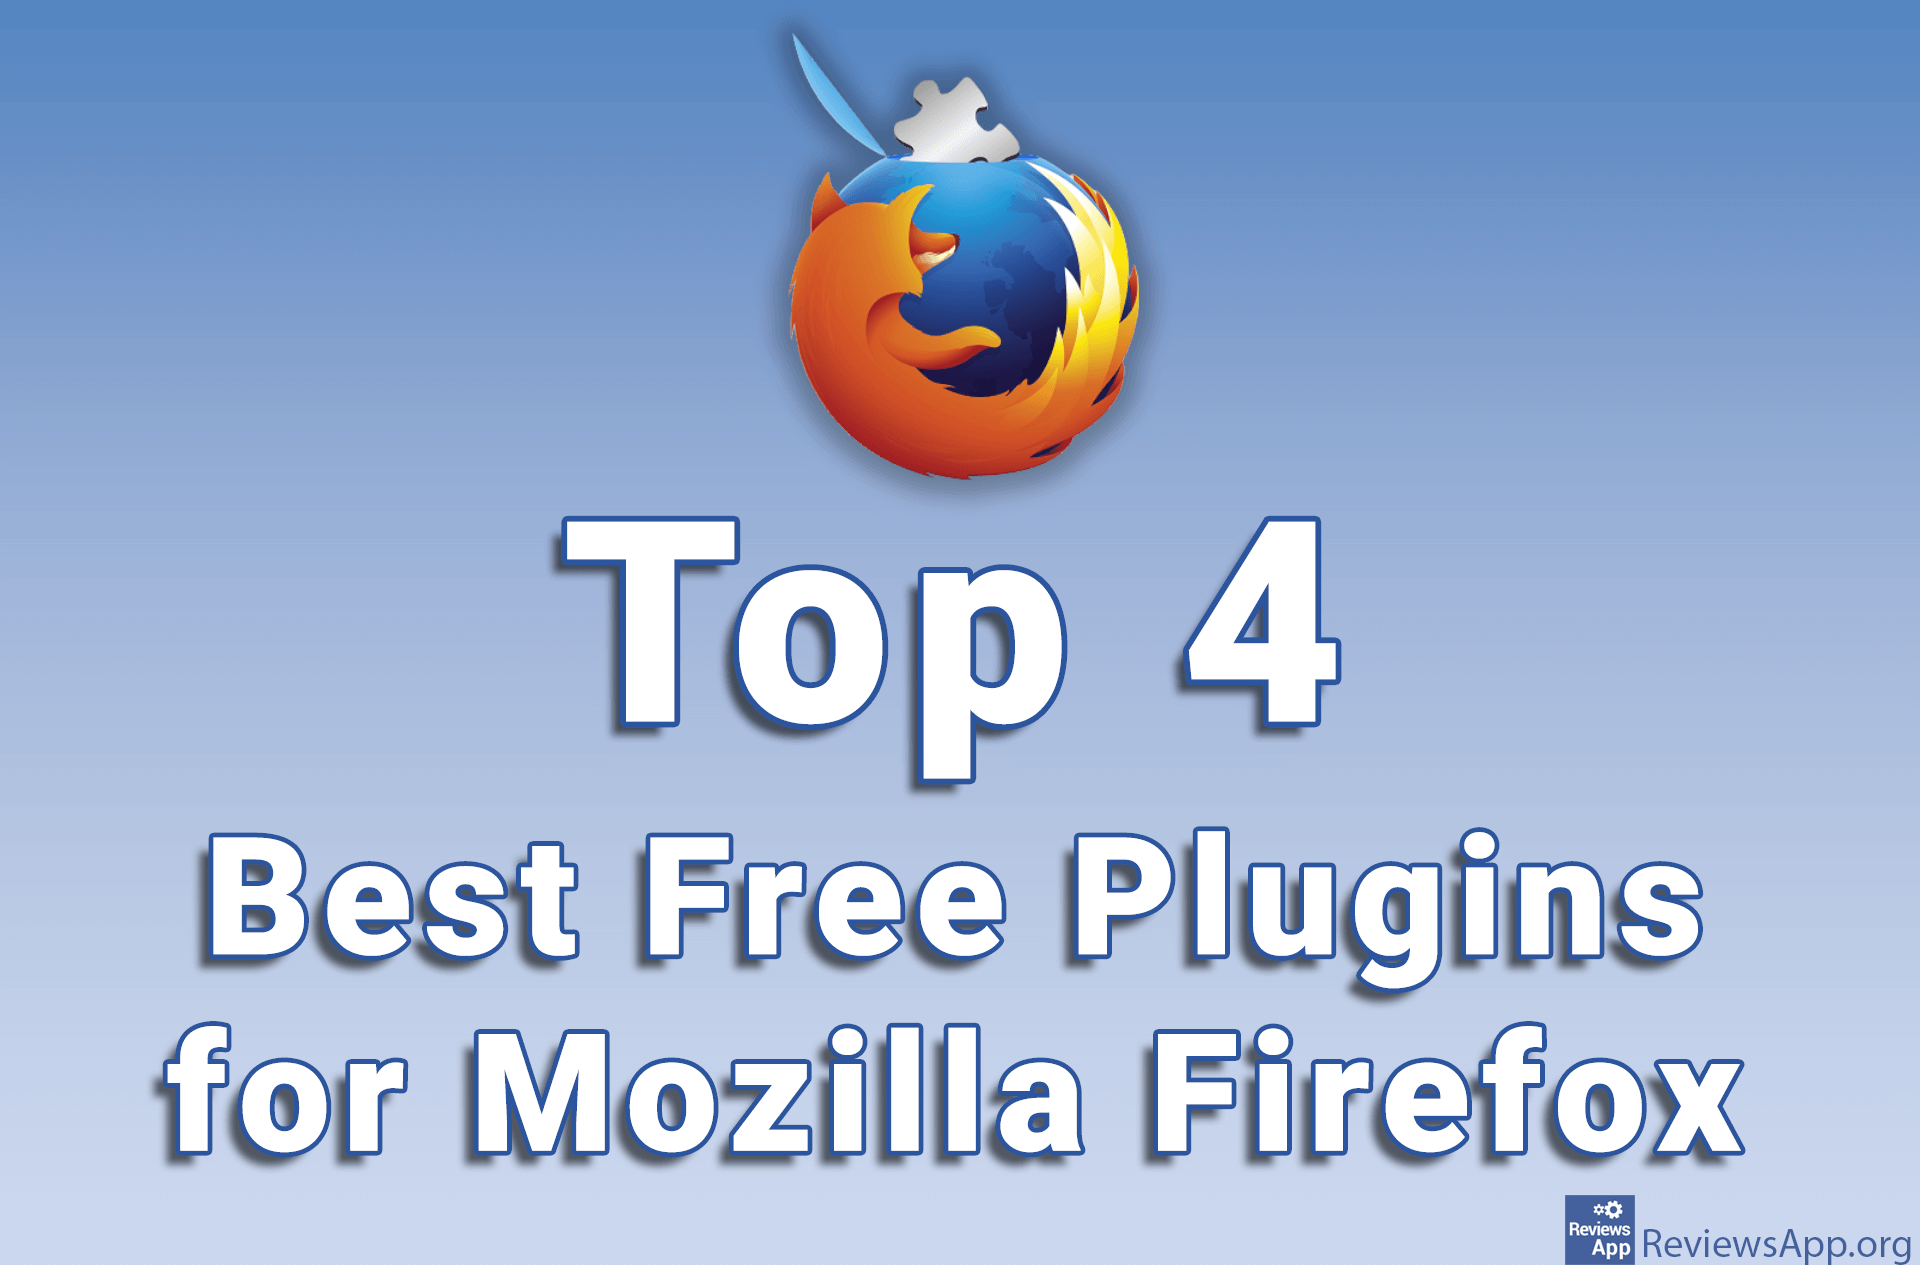 Top 4 Best Free Plugins for Mozilla Firefox